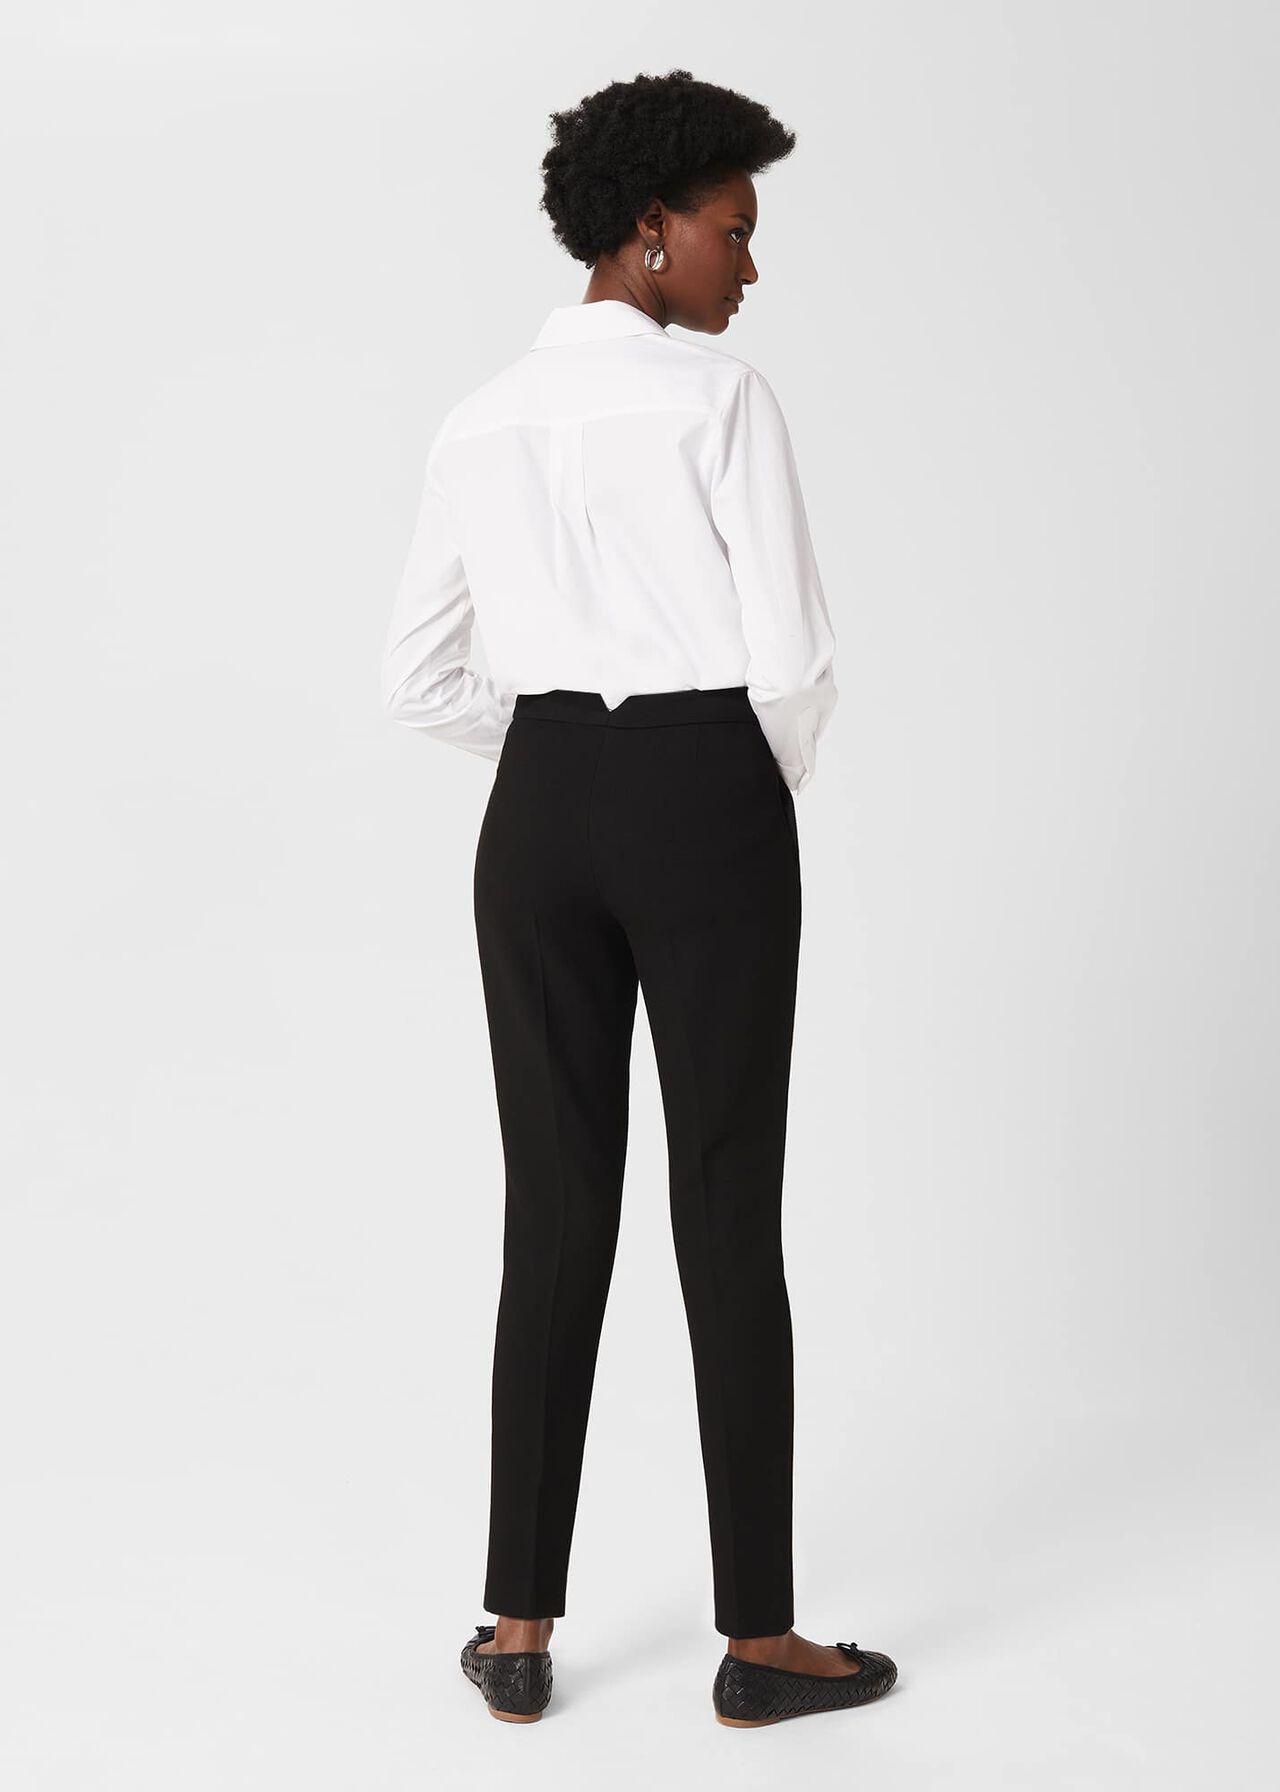 Petite Ophelia Slim Trousers With Stretch, Black, hi-res